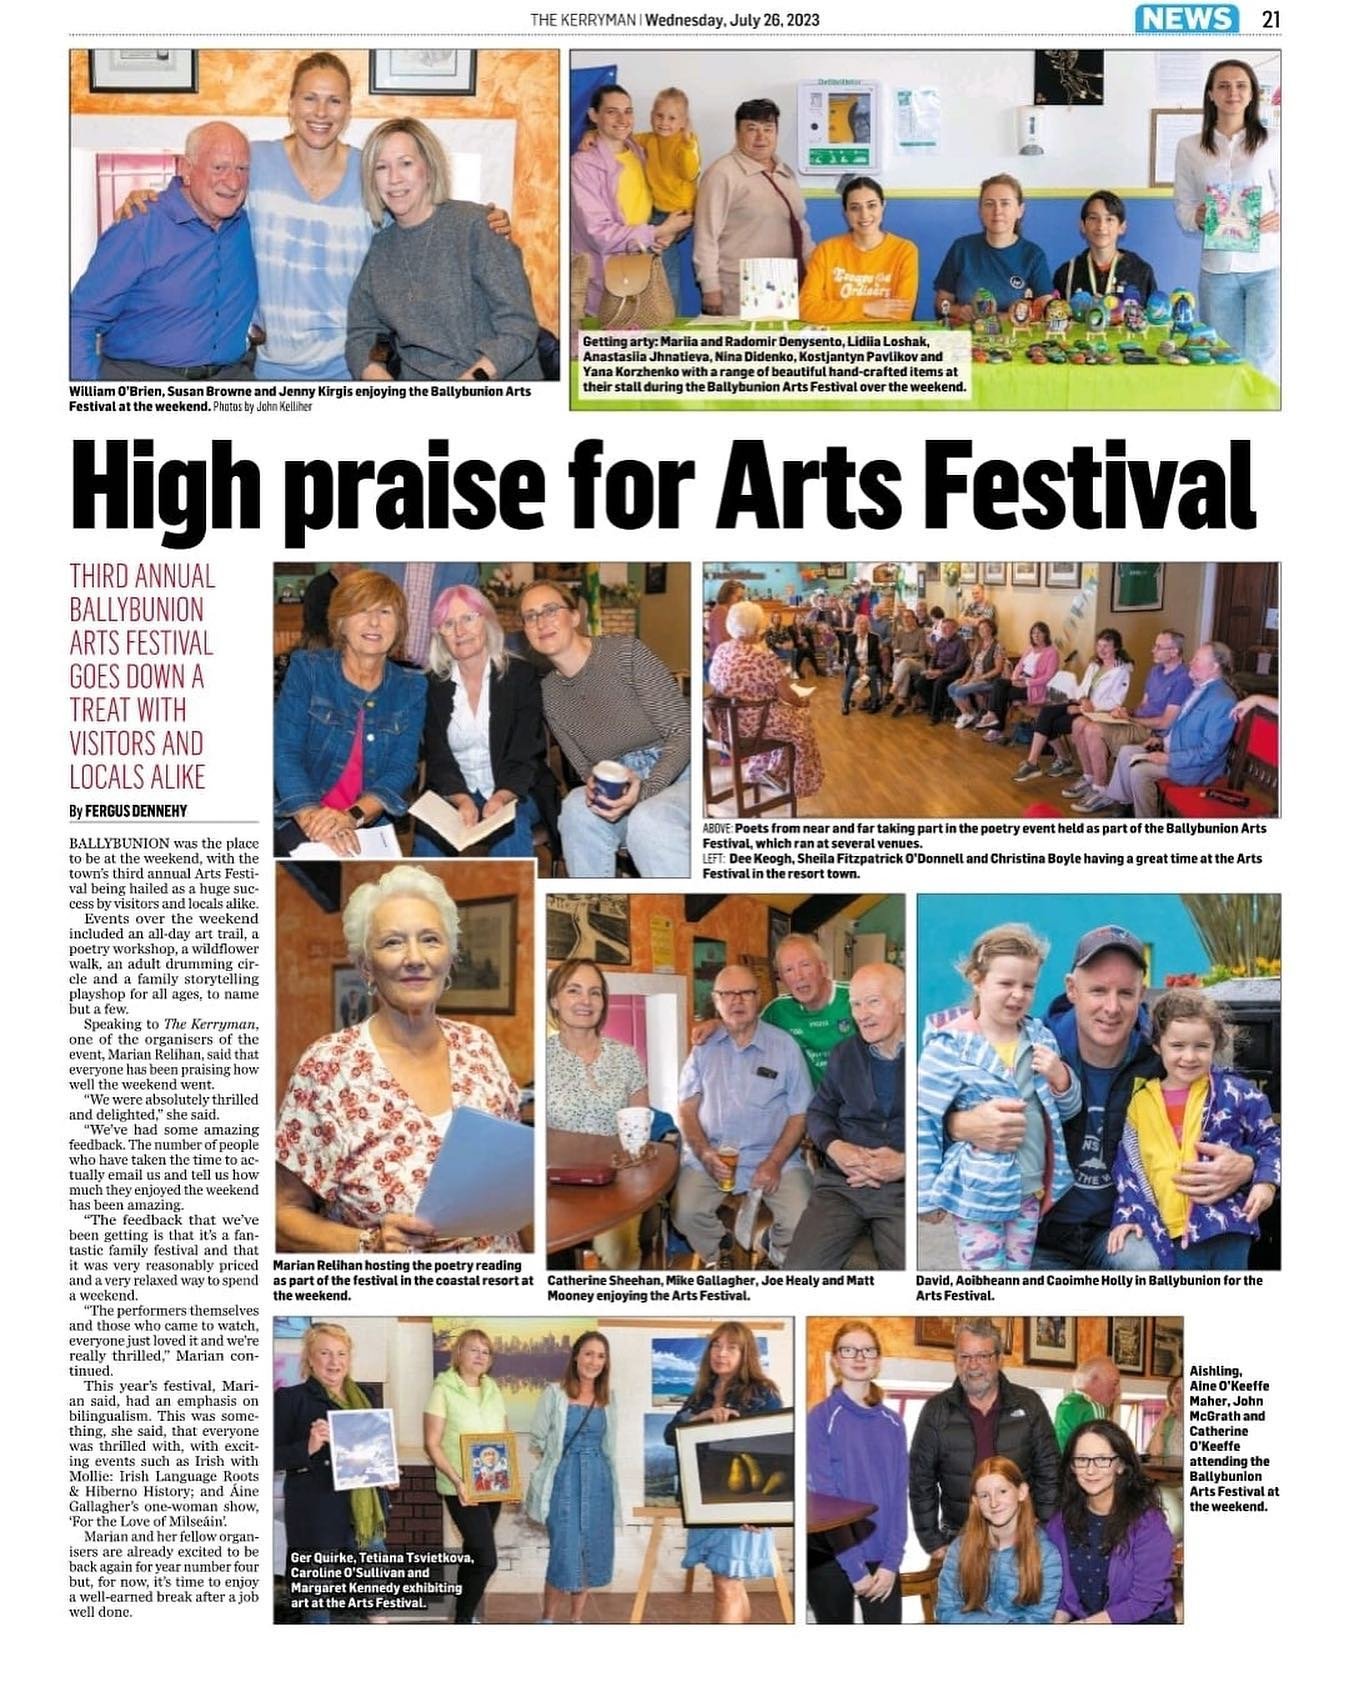 Delighted to be featured in this weeks @the_kerryman_ Thank you Fergus Dennehy for the brilliant write up! 😊

#artsfestival #ballybunion #seaside #poetry #art #workshops #music #festival #sea #summerfestival #beach #yoga #photography #comedy

@disco